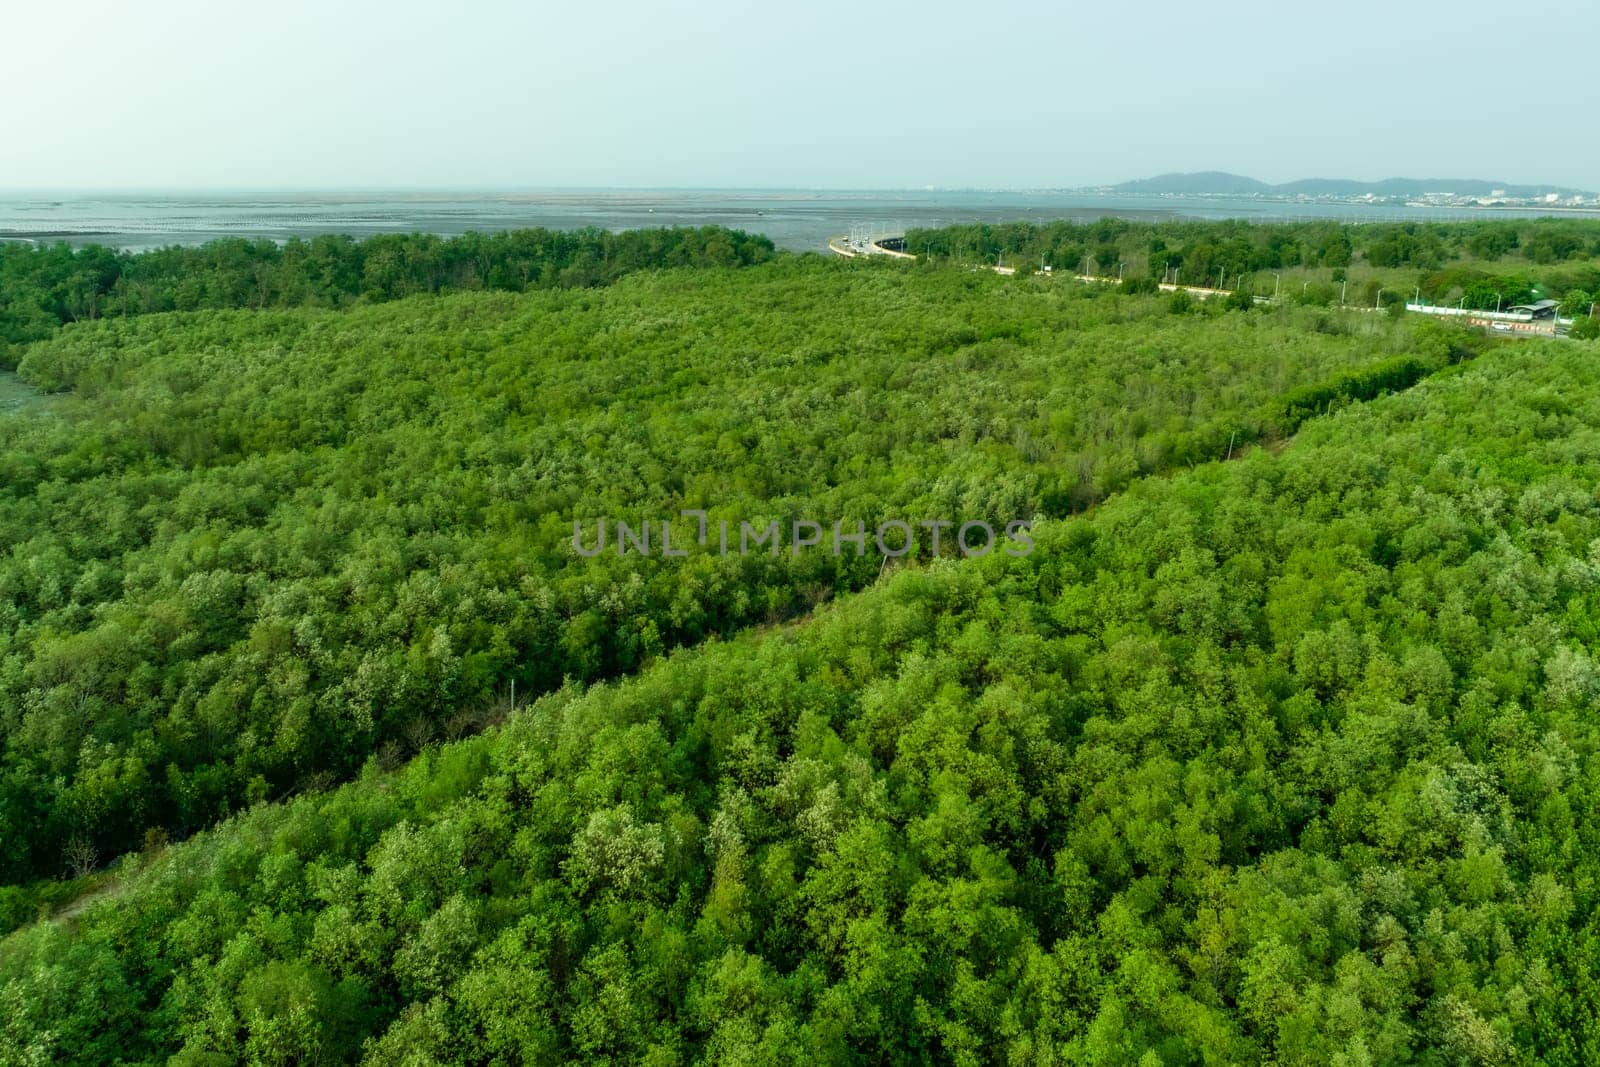 Green mangrove forest capture carbon dioxide. Net zero emissions. Mangroves capture CO2 from atmosphere. Blue carbon ecosystems. Aerial view mangrove trees and mudflat coastal. Natural carbon sinks. by Fahroni